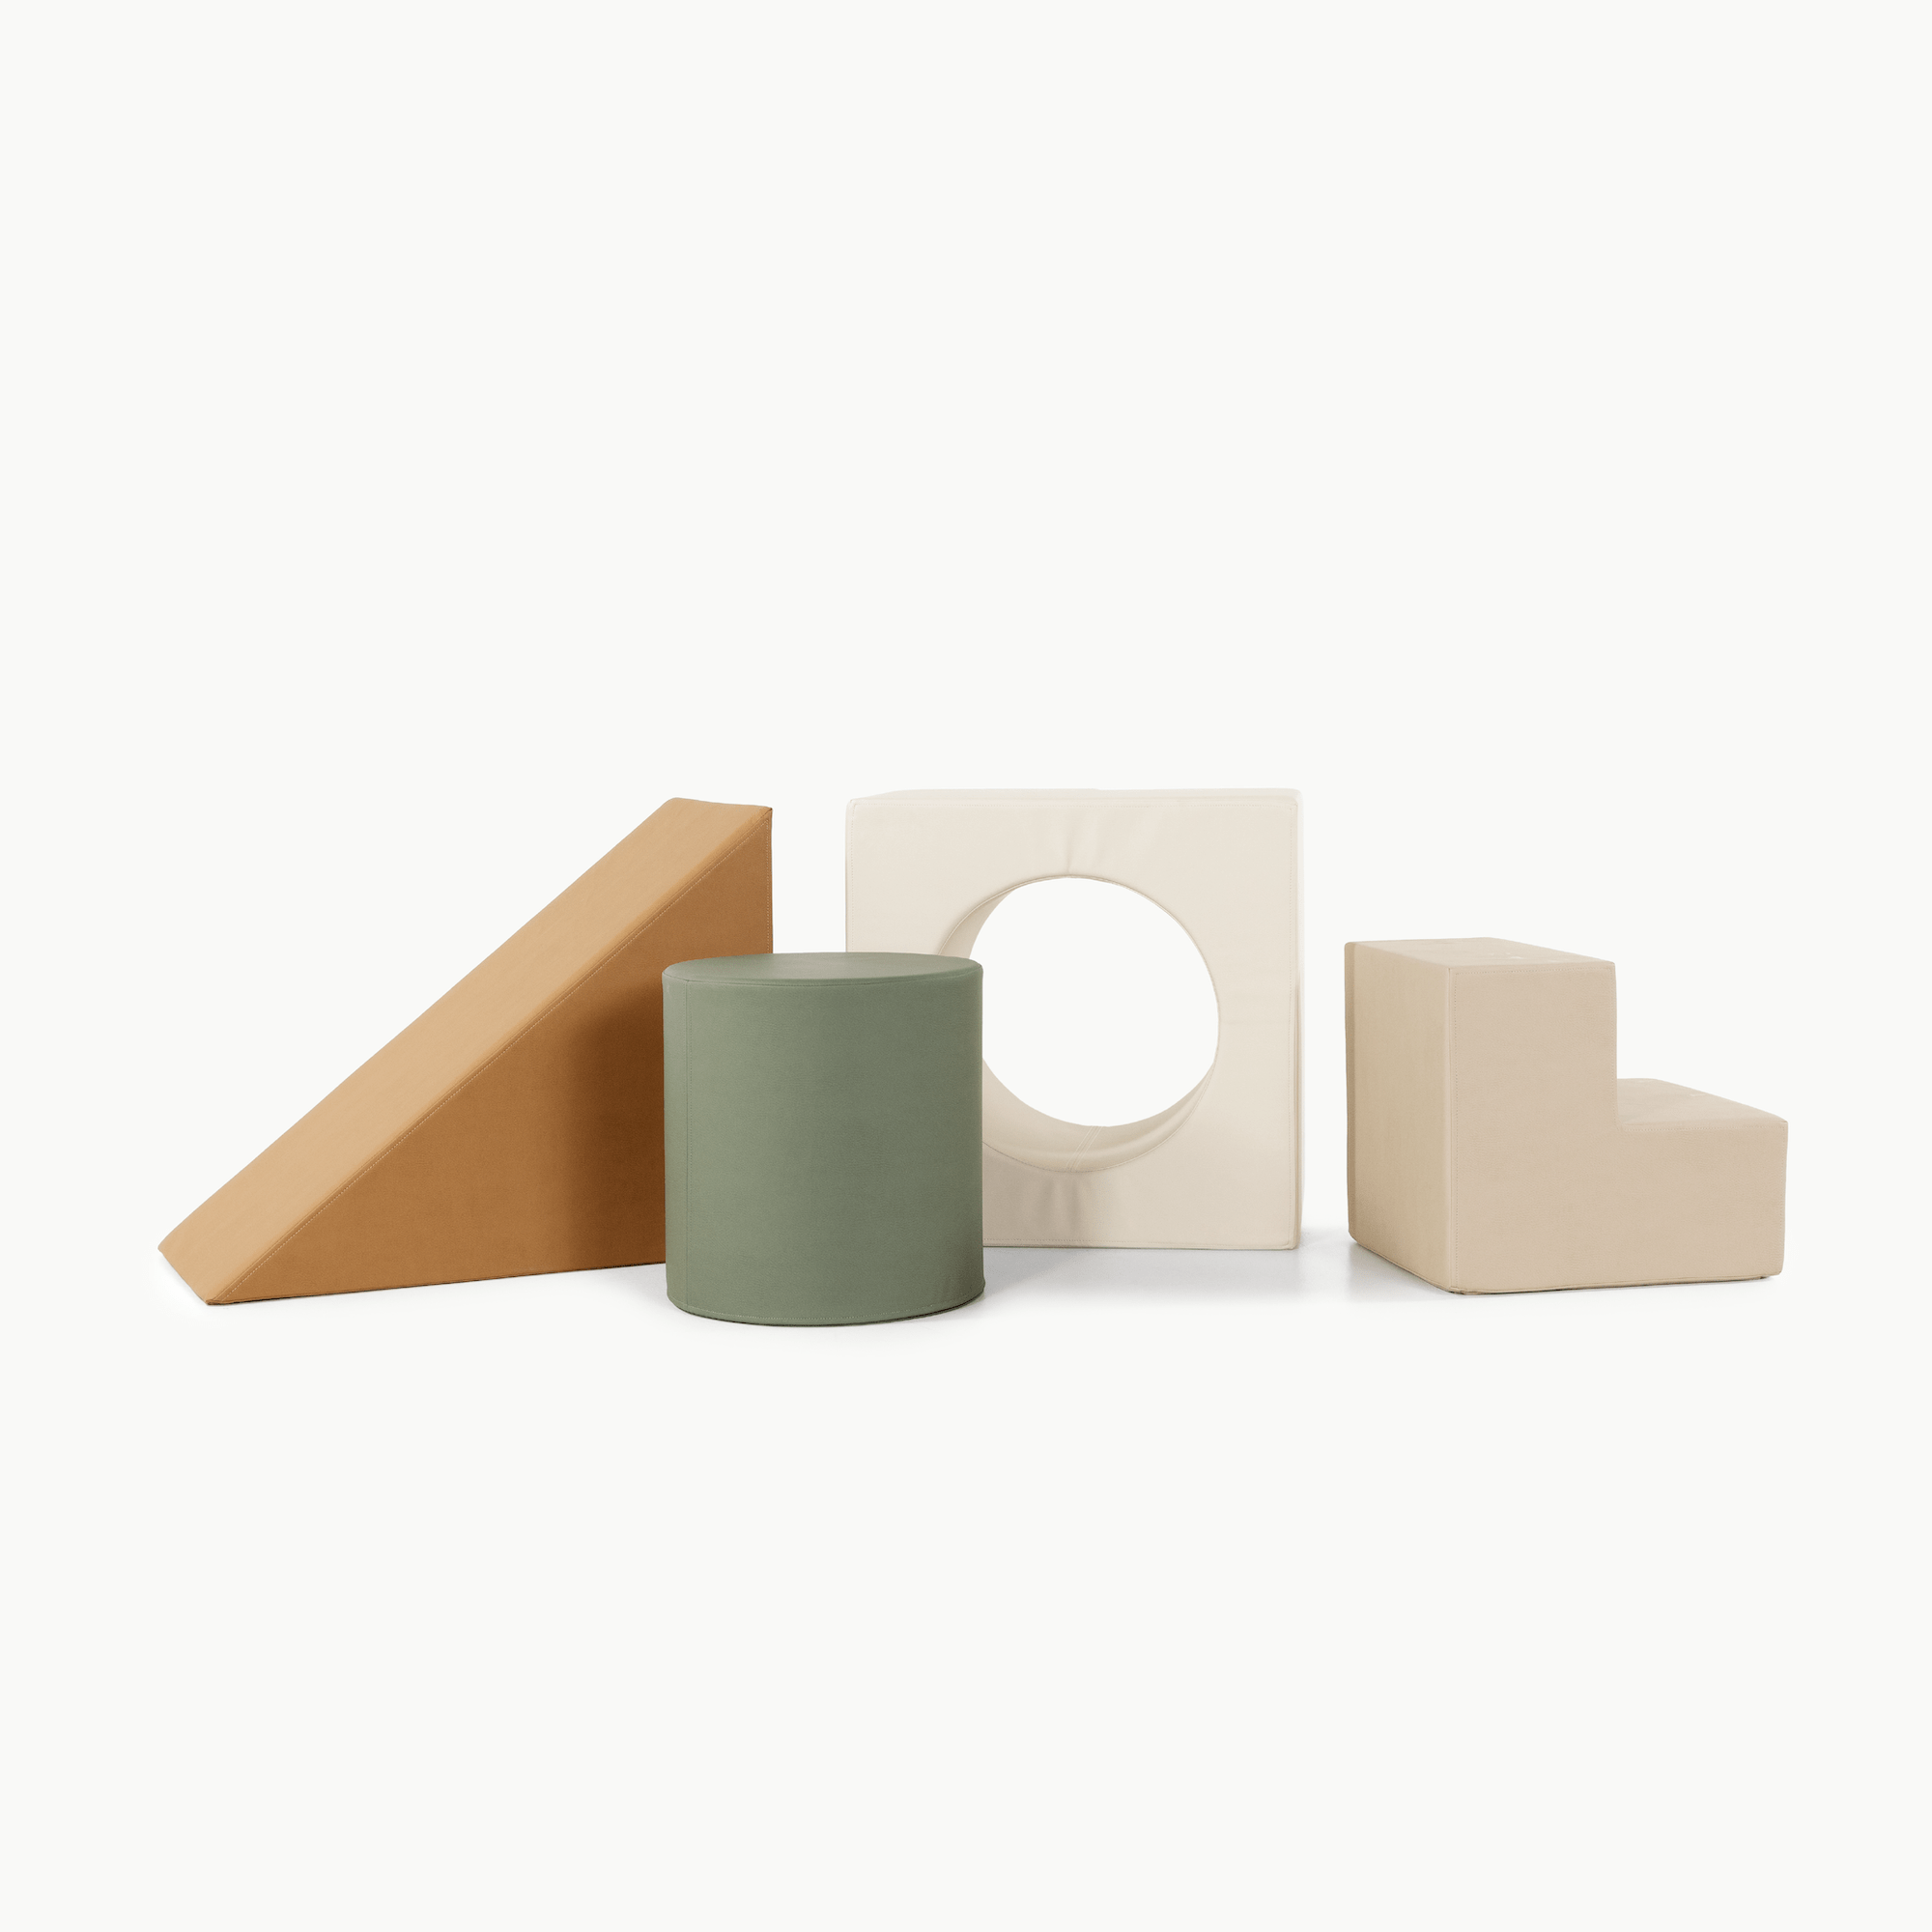 Camel • Ivory • Thyme • Millet@Thyme Block Playset